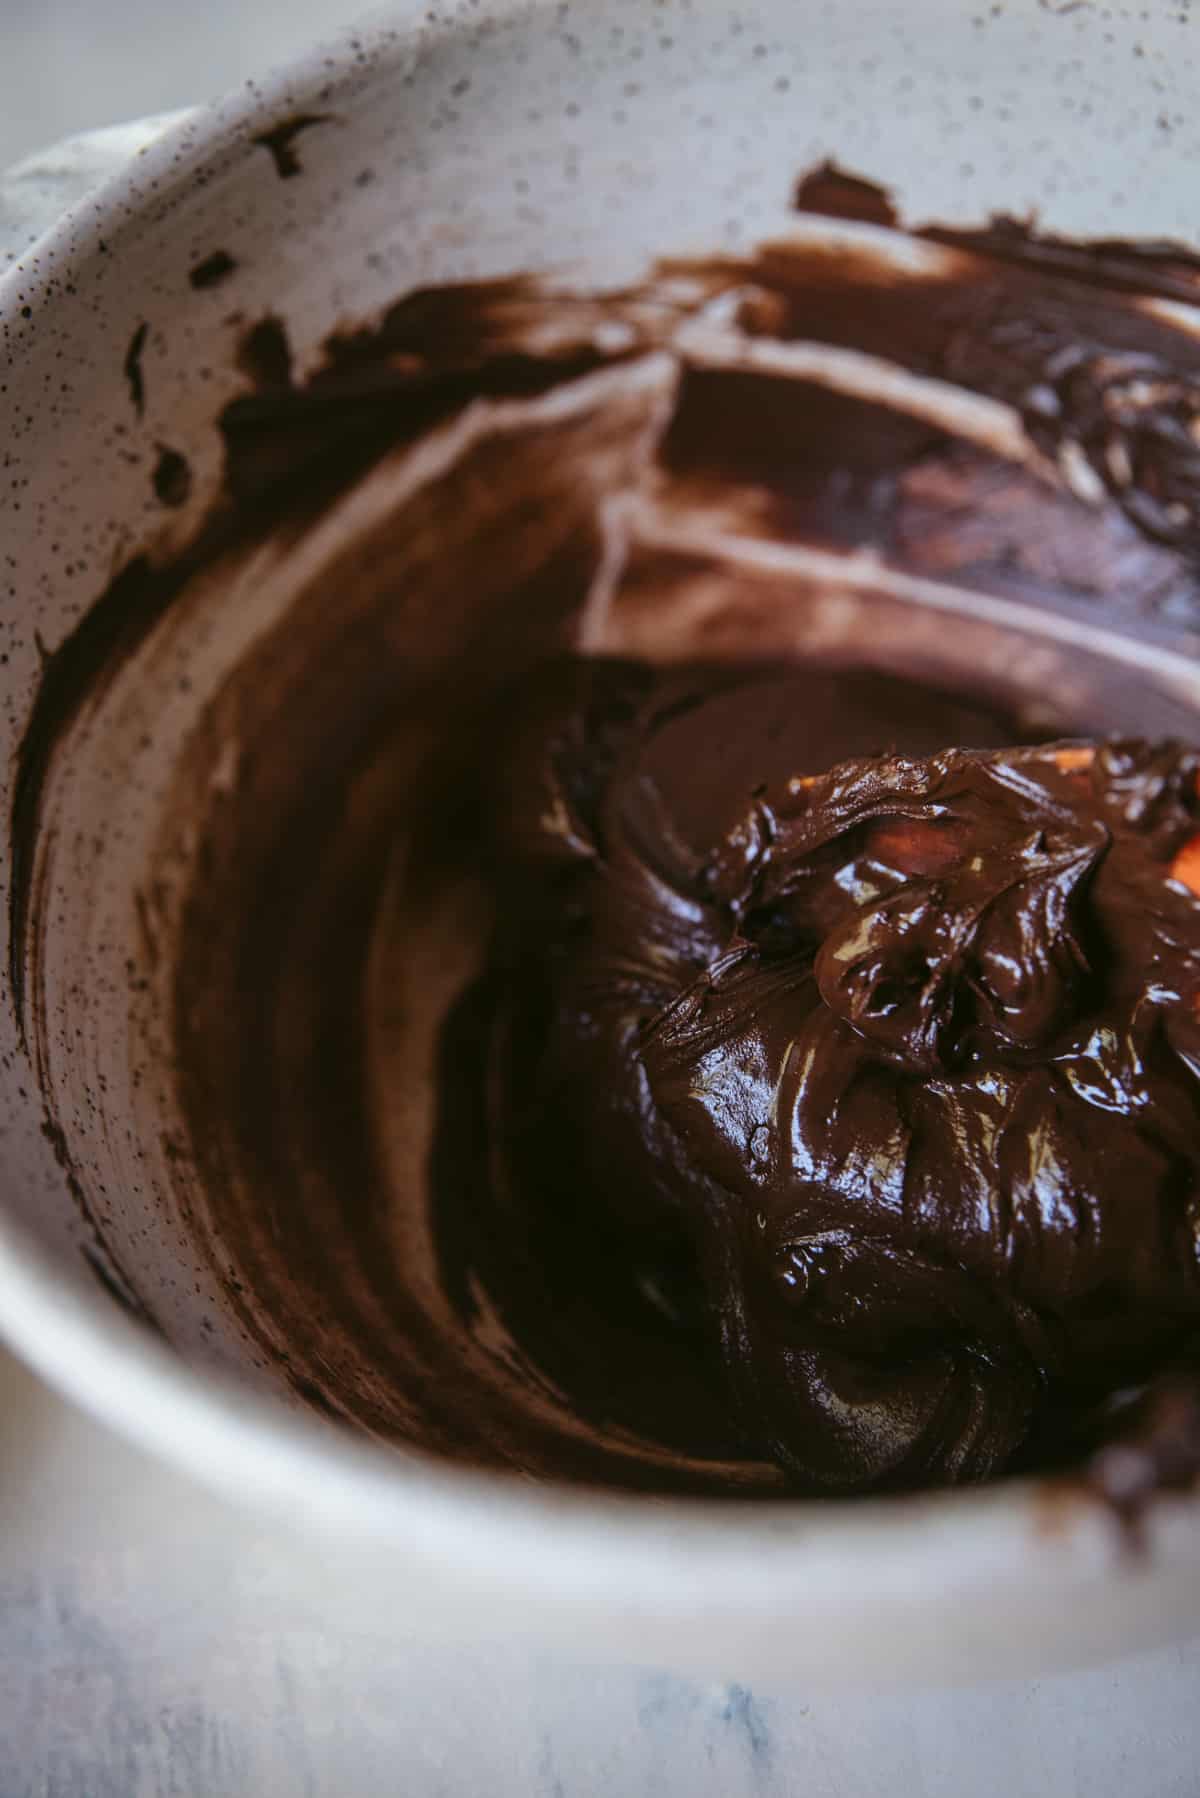 Melted chocolate and butter in a ceramic mixing bowl with a spatula scooping it from the side.  Chocolate residue is smeared on the sides.